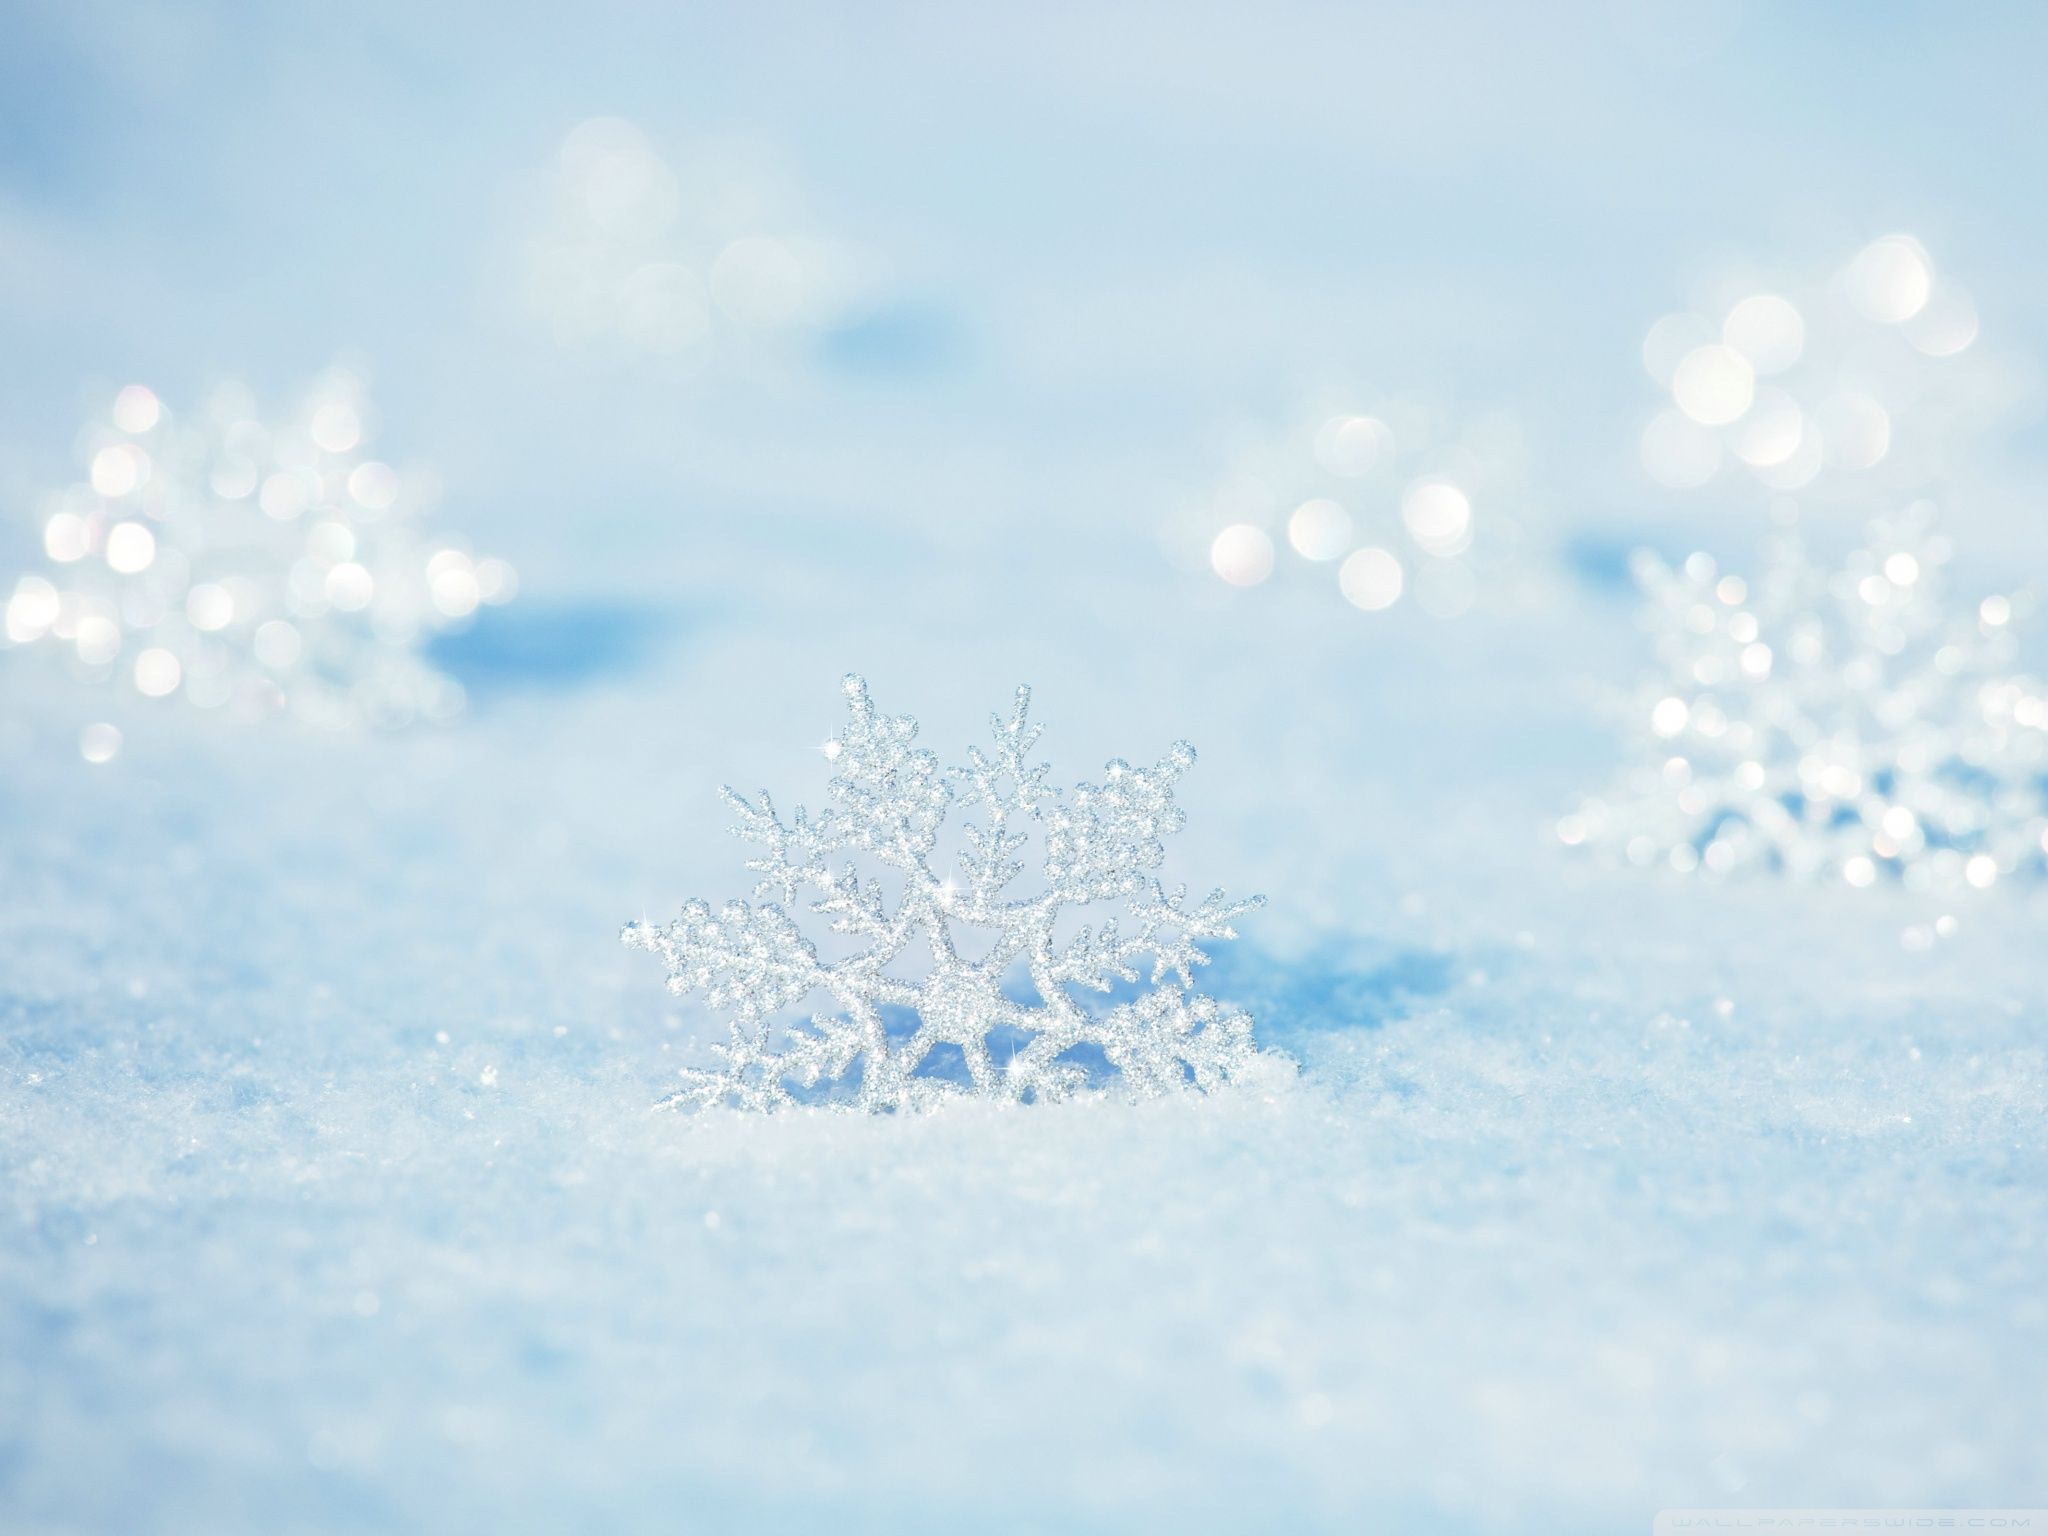 A group of snowflakes on the ground - Snowflake